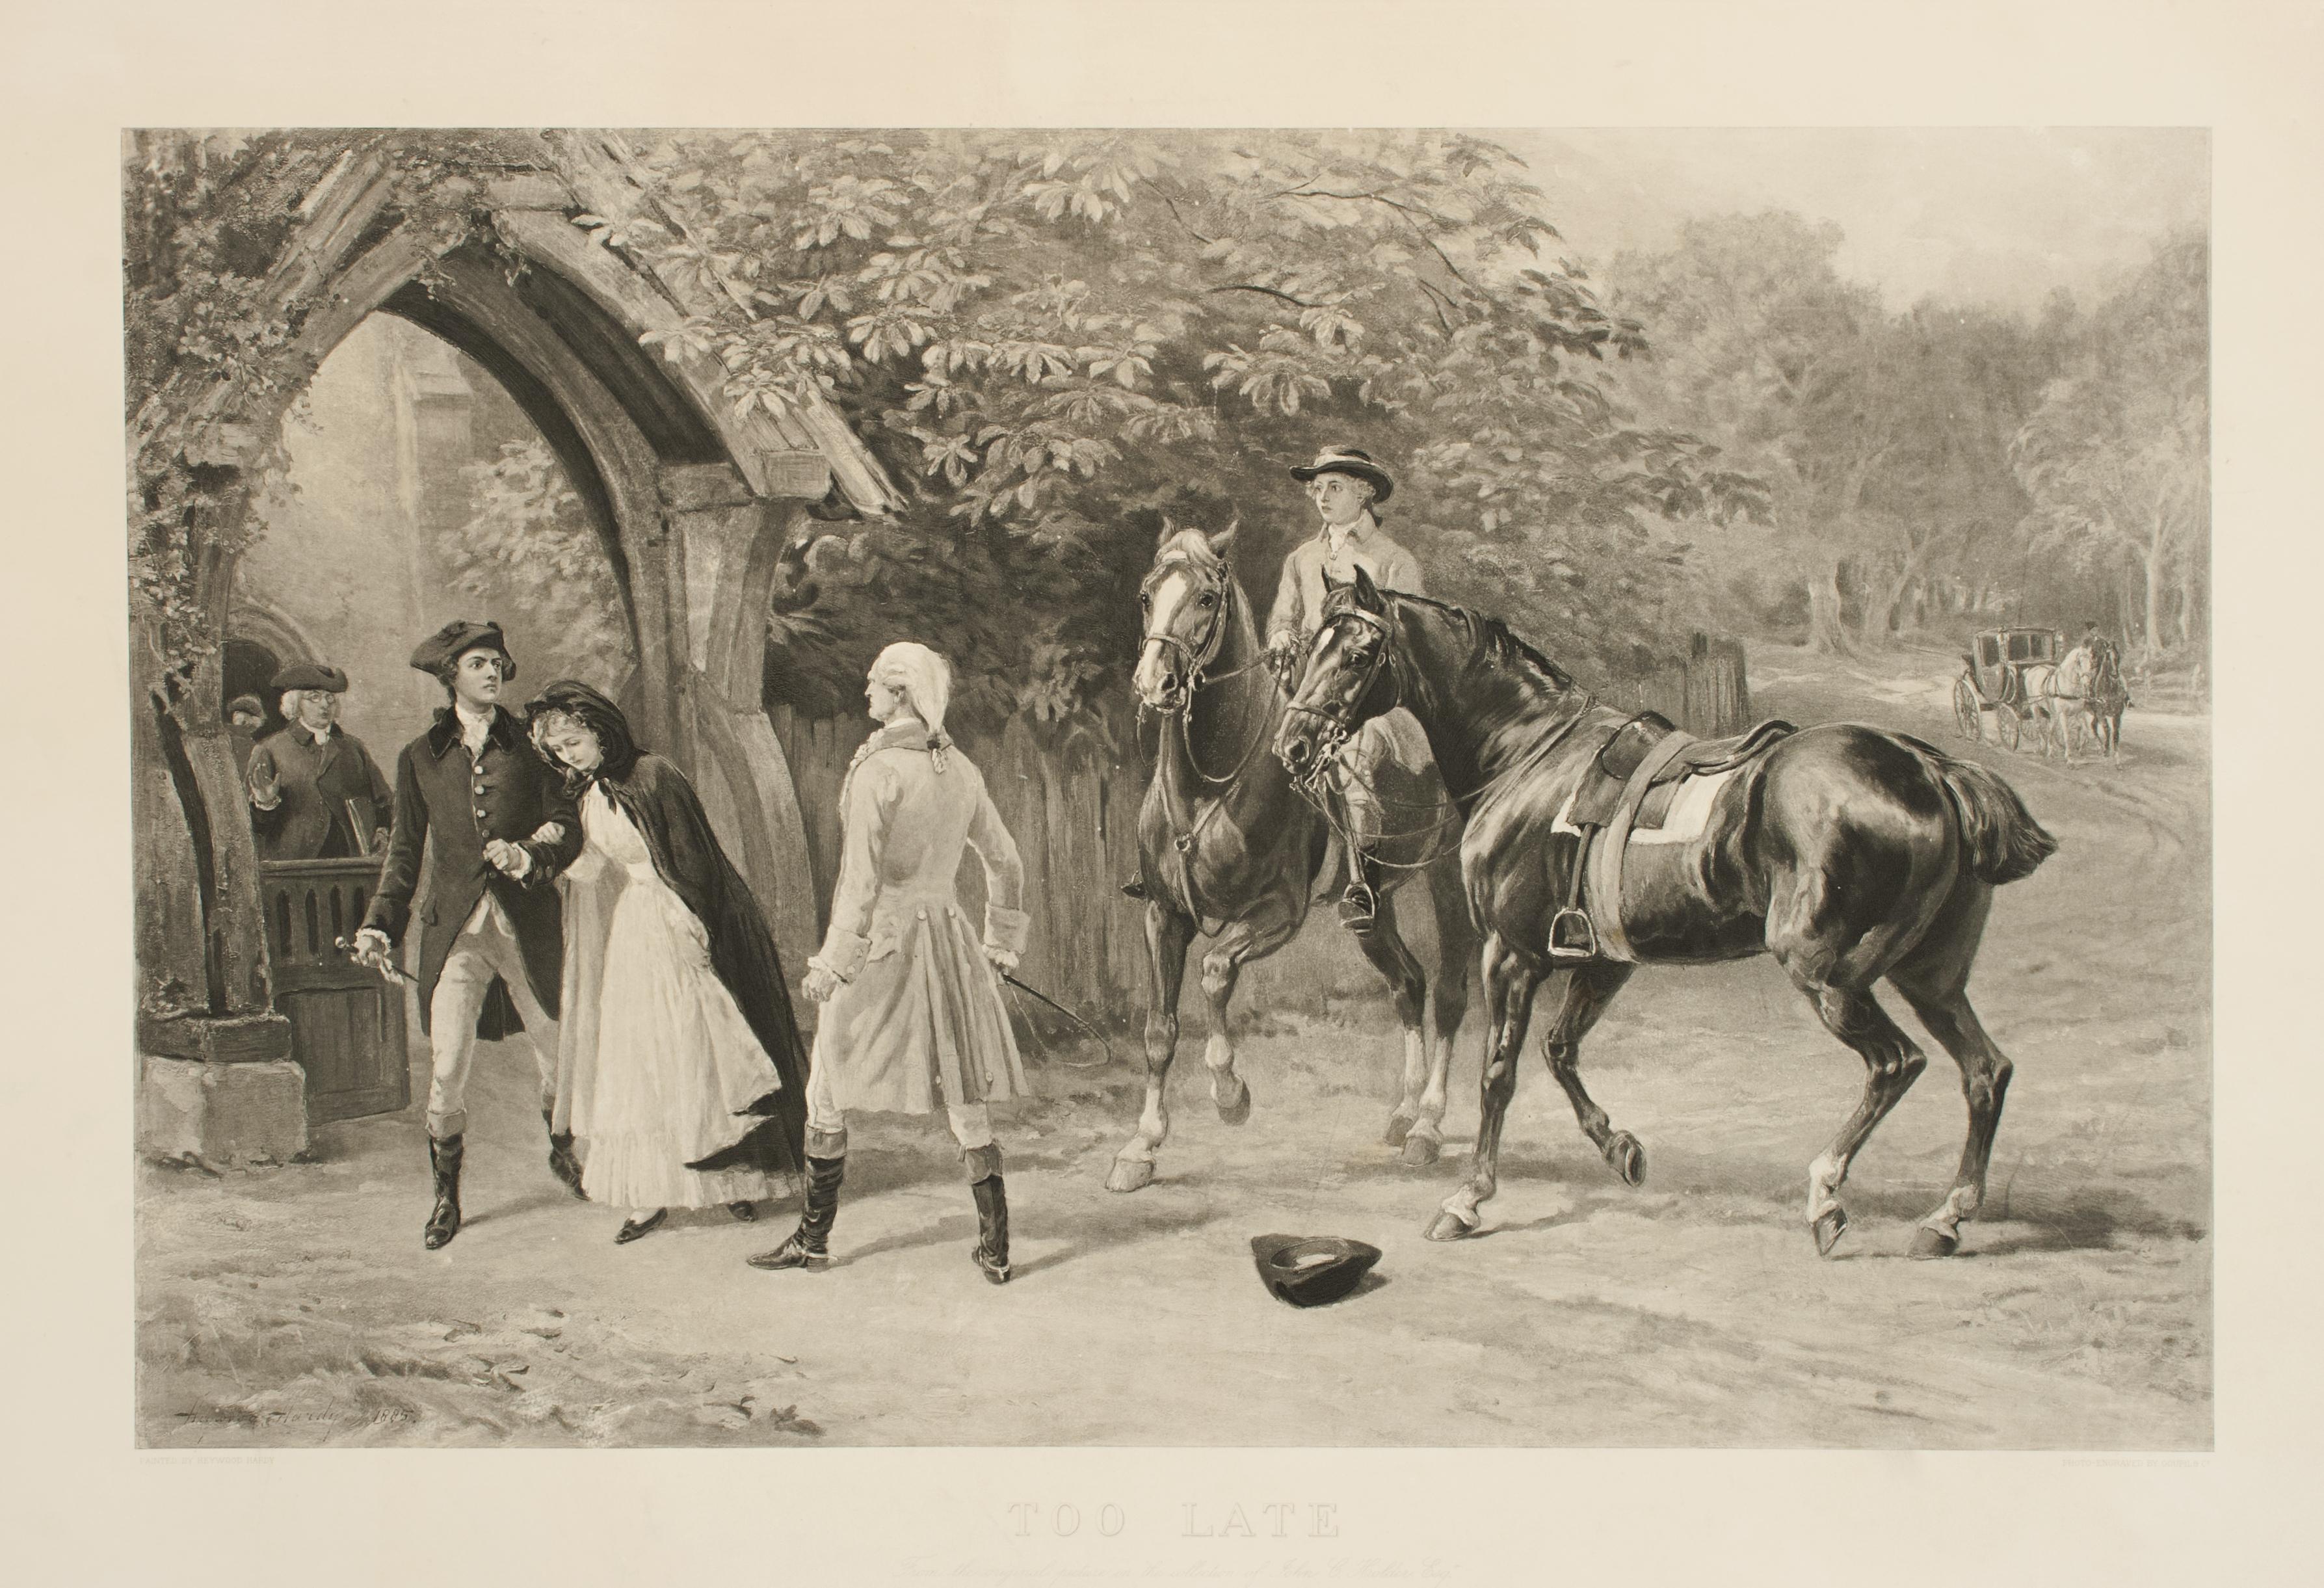 Equestrian Print, Heywood Hardy.
A fine photogravure after the original painting by Heywood Hardy titled 'Too Late'. The 'romantic' print depicts a young couple leaving the church where they have just got married. Her distraught father and brother